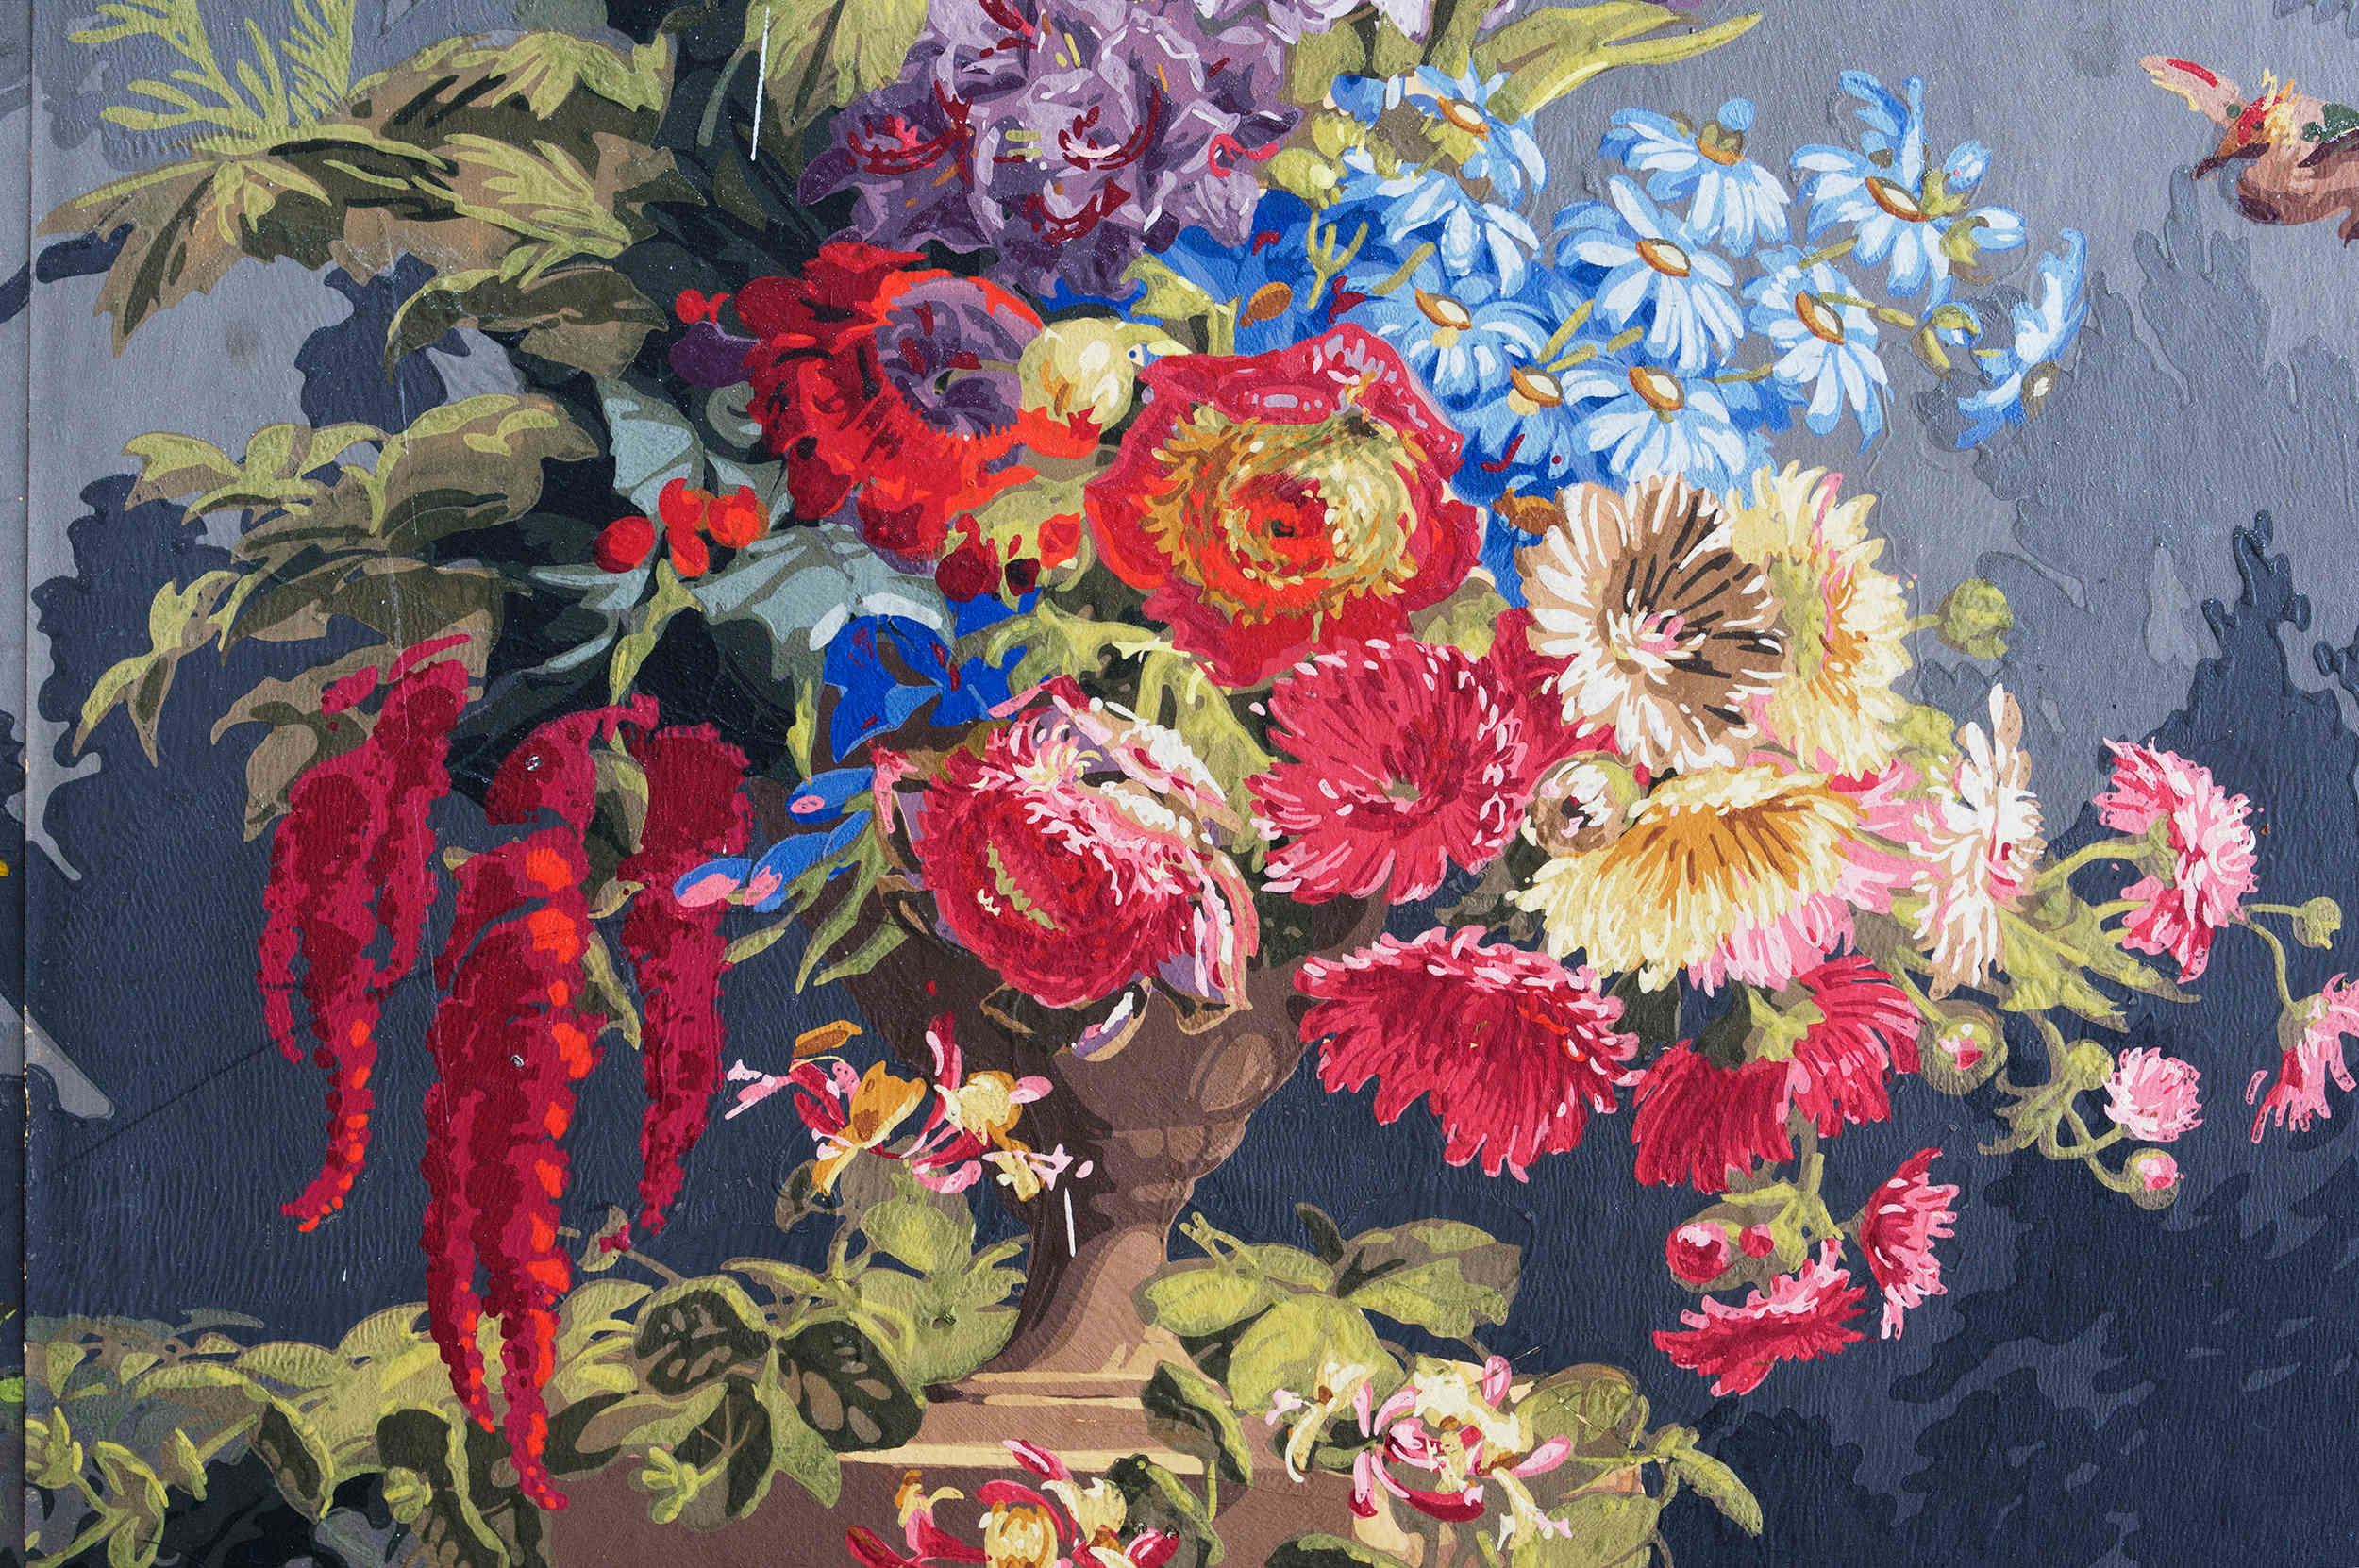 Colourful floral scene on wallpaper